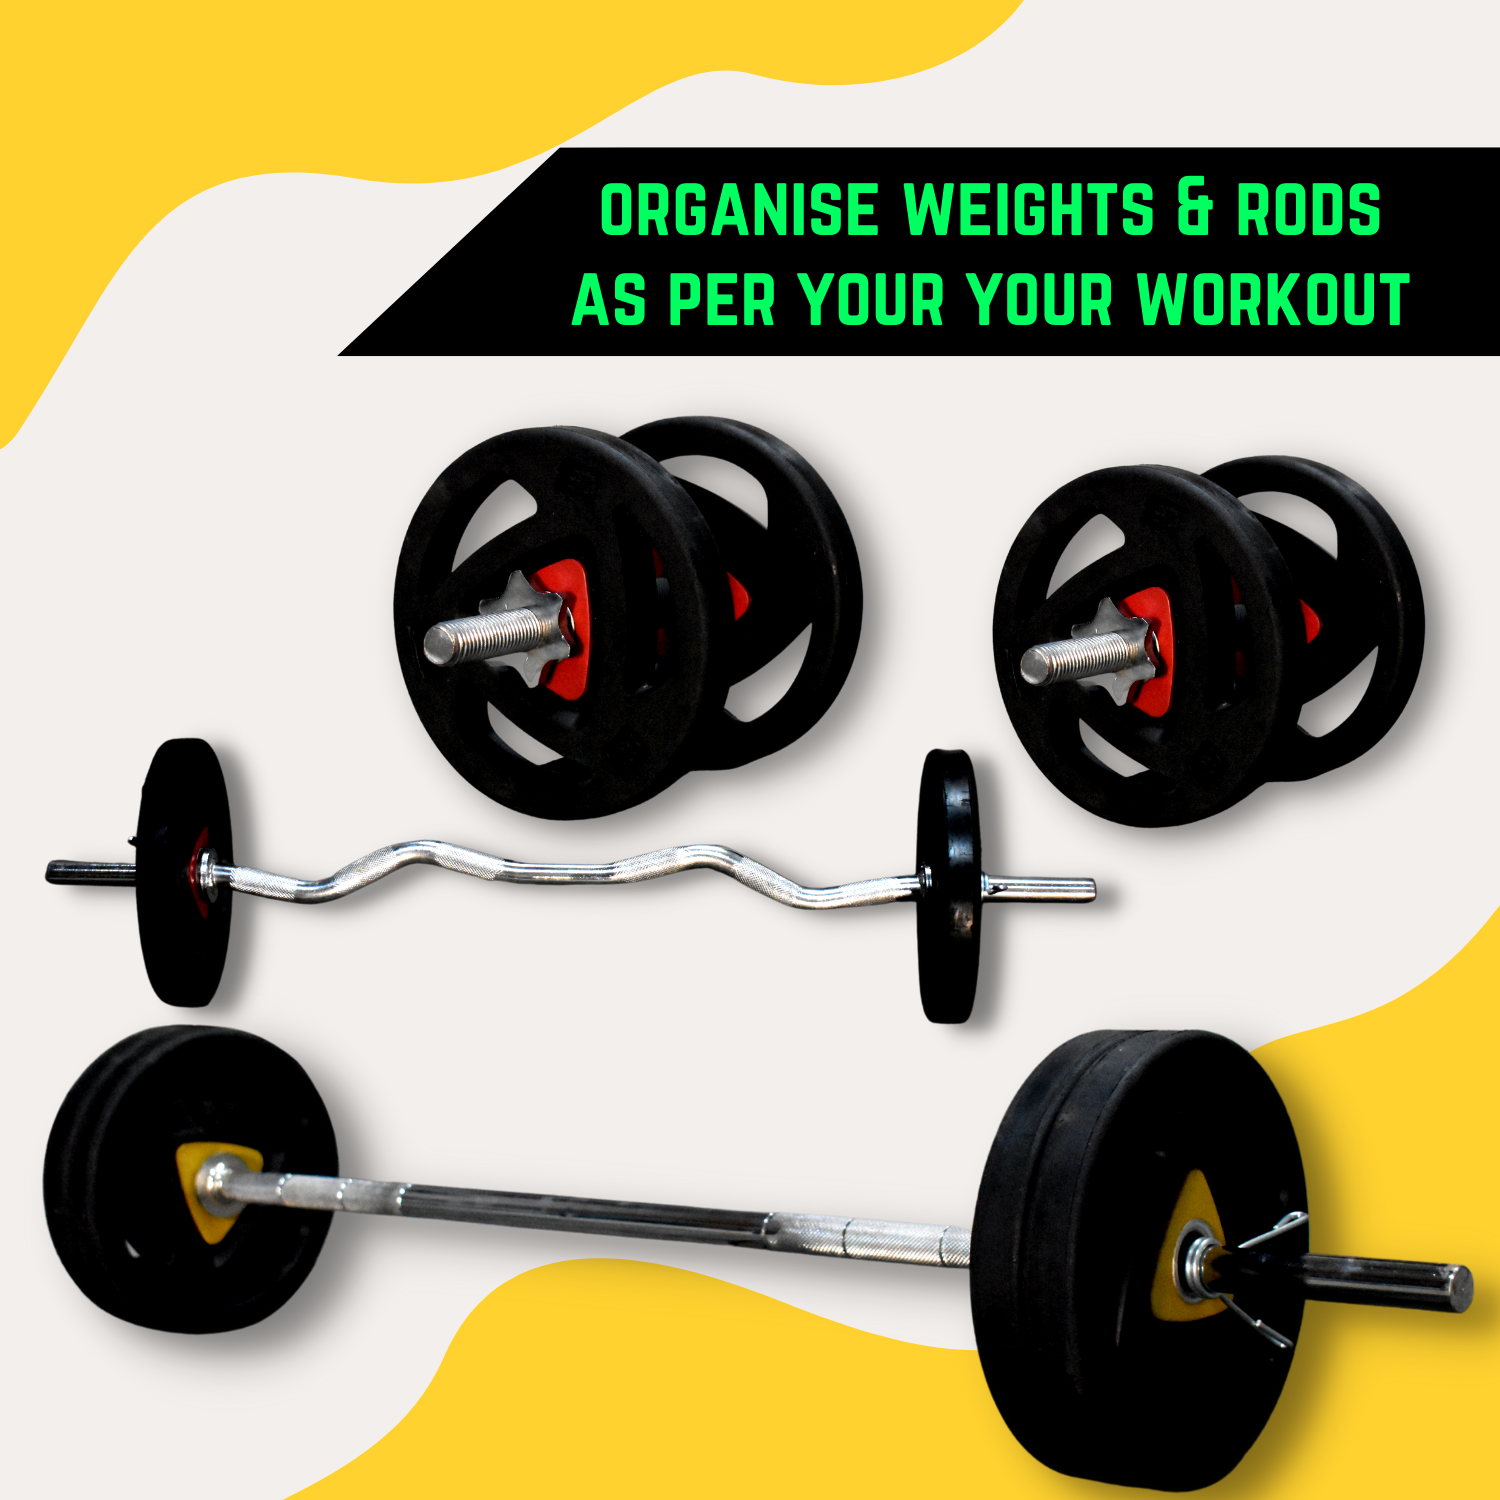 Hashtag Fitness gym equipment set for home workout 10kg,20kg,30kg to 100kg  metal integrated rubber weights with 5ft rod,dumbbell set for home gym -  Hashtag Fitness : Online gym equipments for home